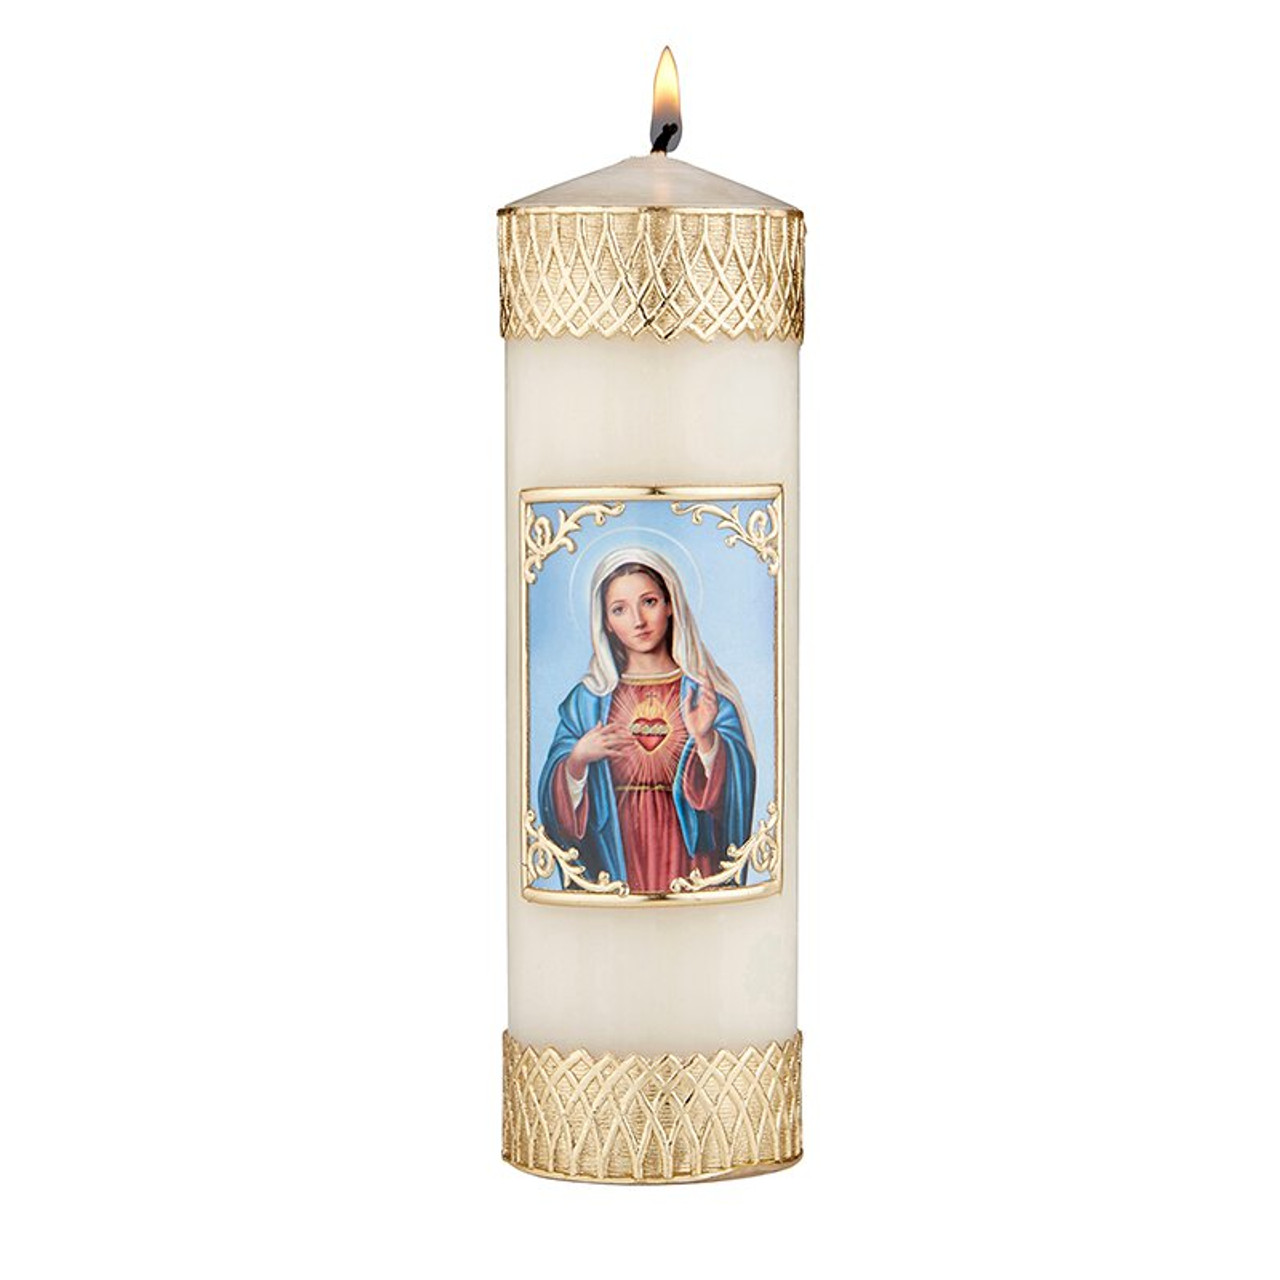 Mother Mary Candle, Virgin Mary, Madonna, Mama Mary, Mary Candle, Mary Mother  Candle, Pillar Candles, Gift, Scented Candle, Catholic Candle 